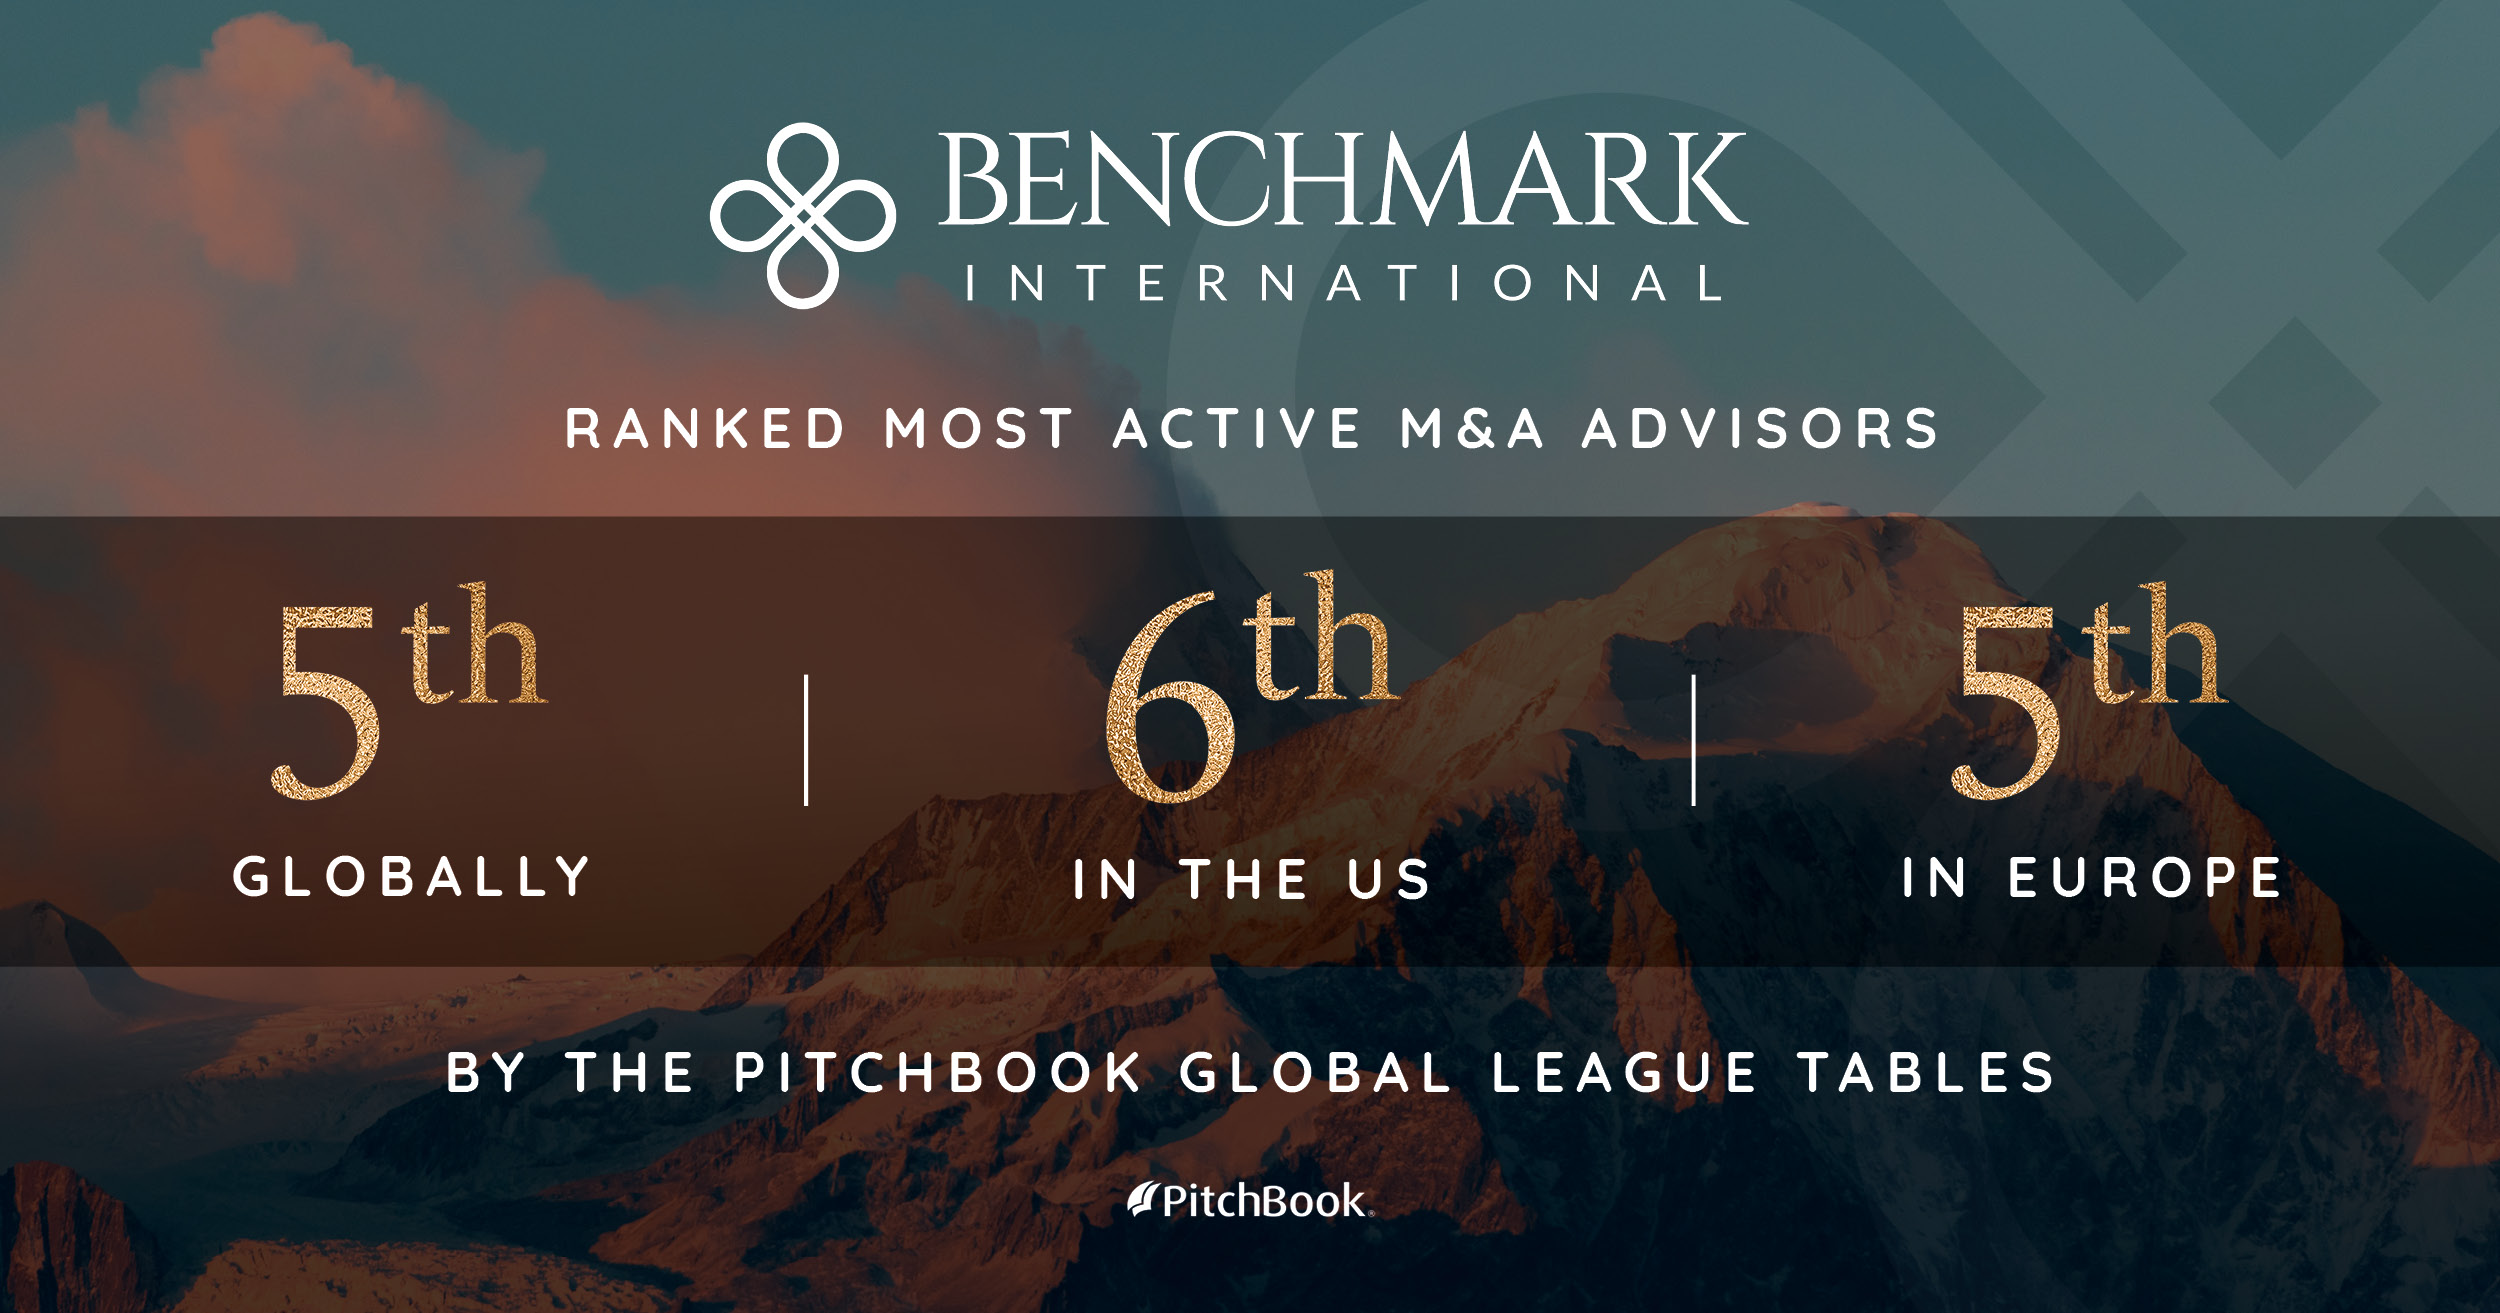 Benchmark International Recognized by PitchBook